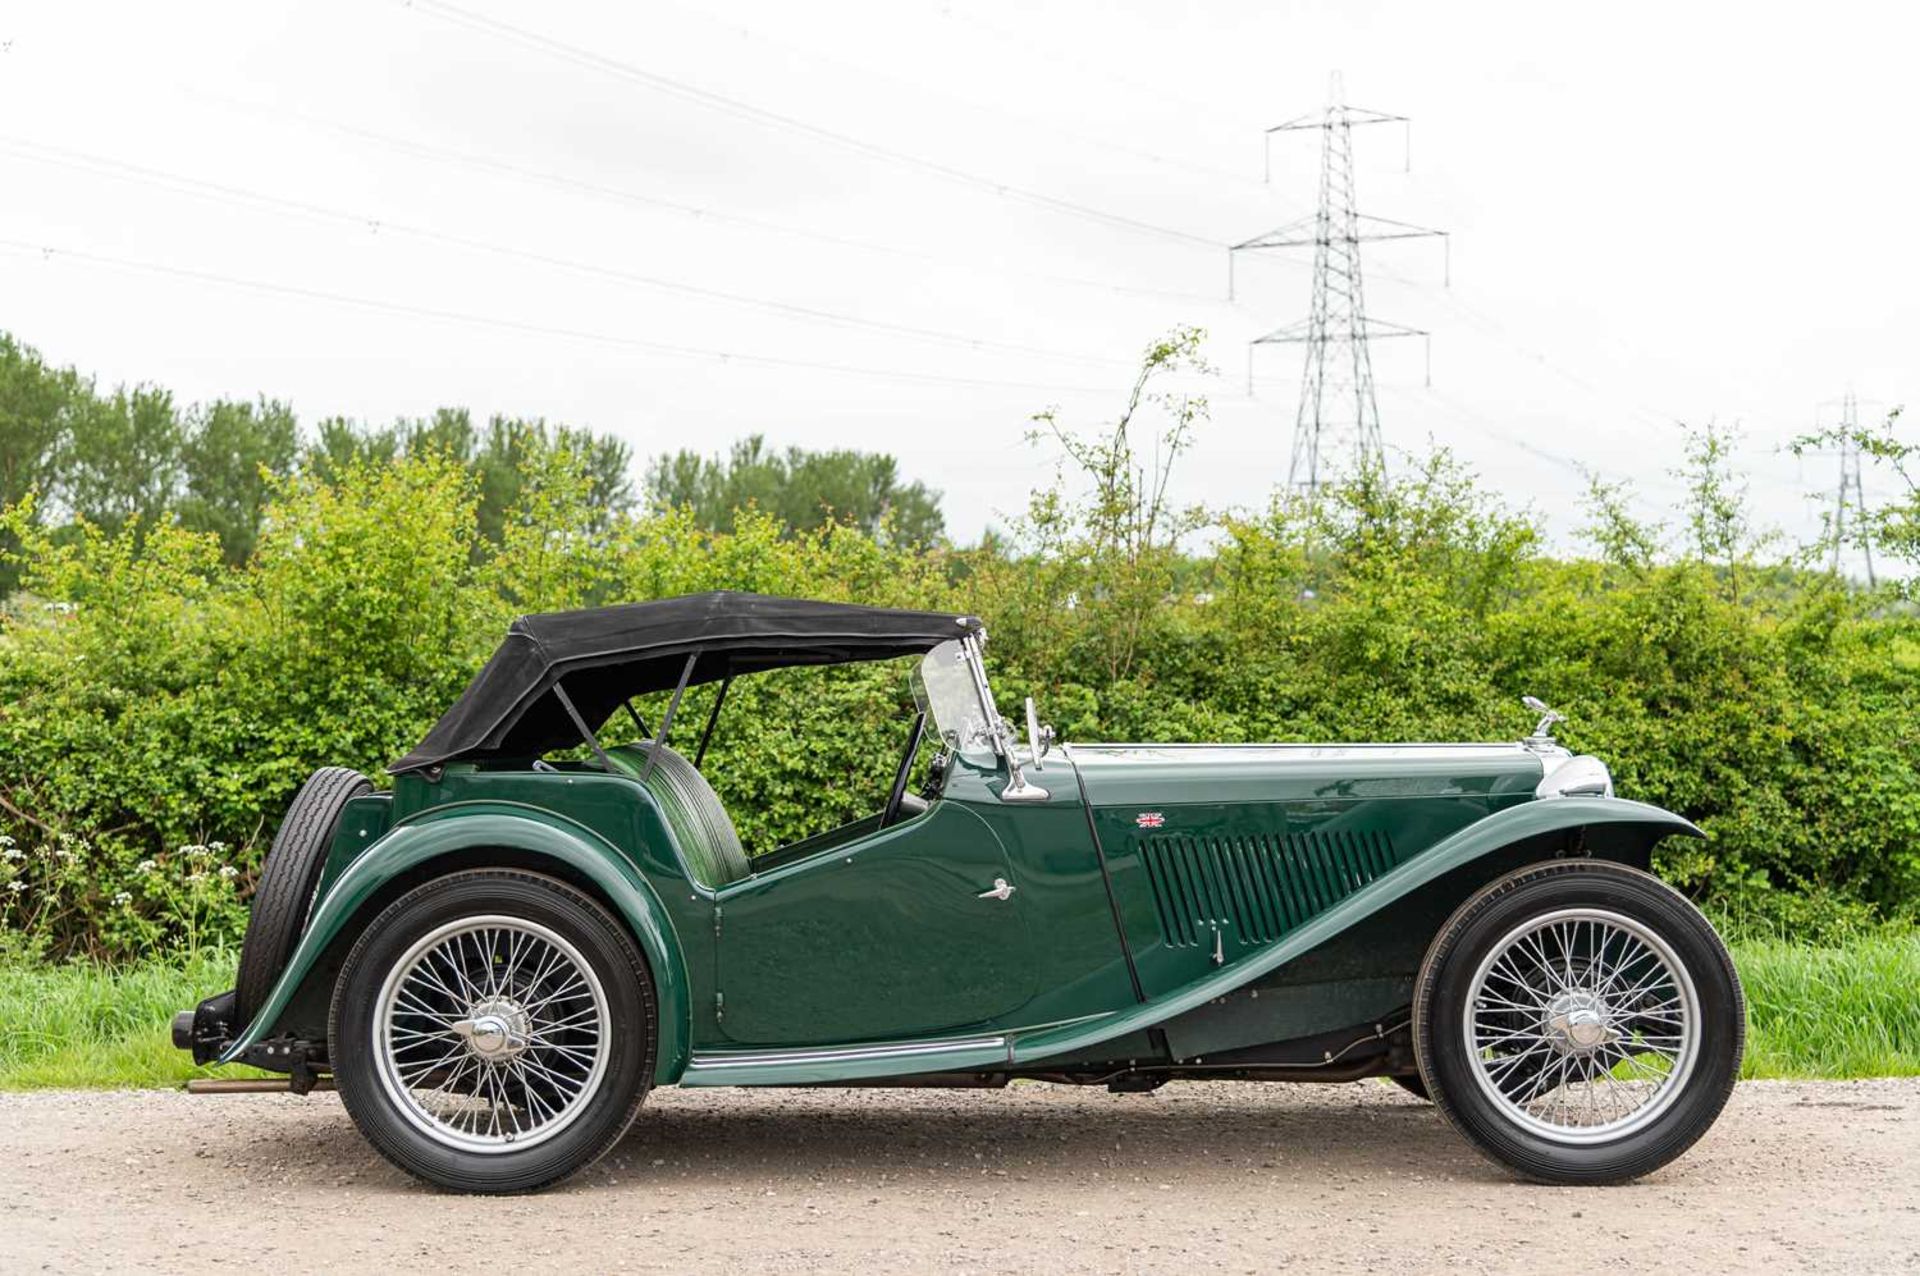 1947 MG TC Midget  Fully restored, right-hand-drive UK home market example - Image 10 of 76